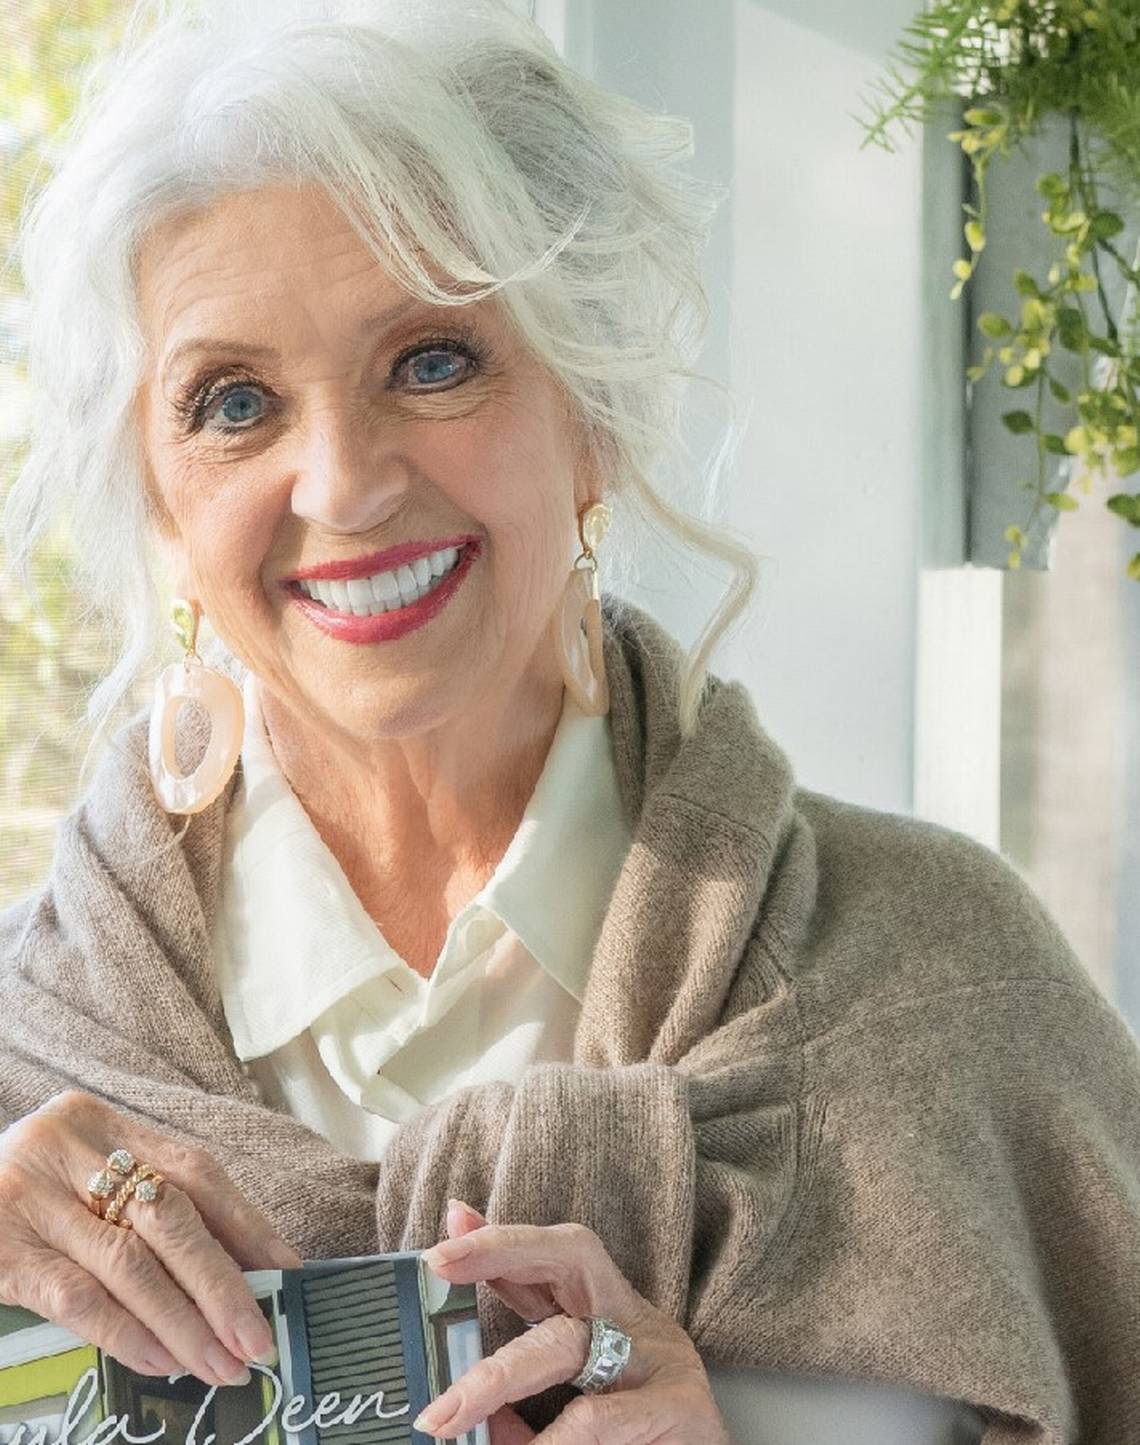 Southern cook Paula Deen coming to Myrtle Beach, SC. Here’s how and when you can meet her